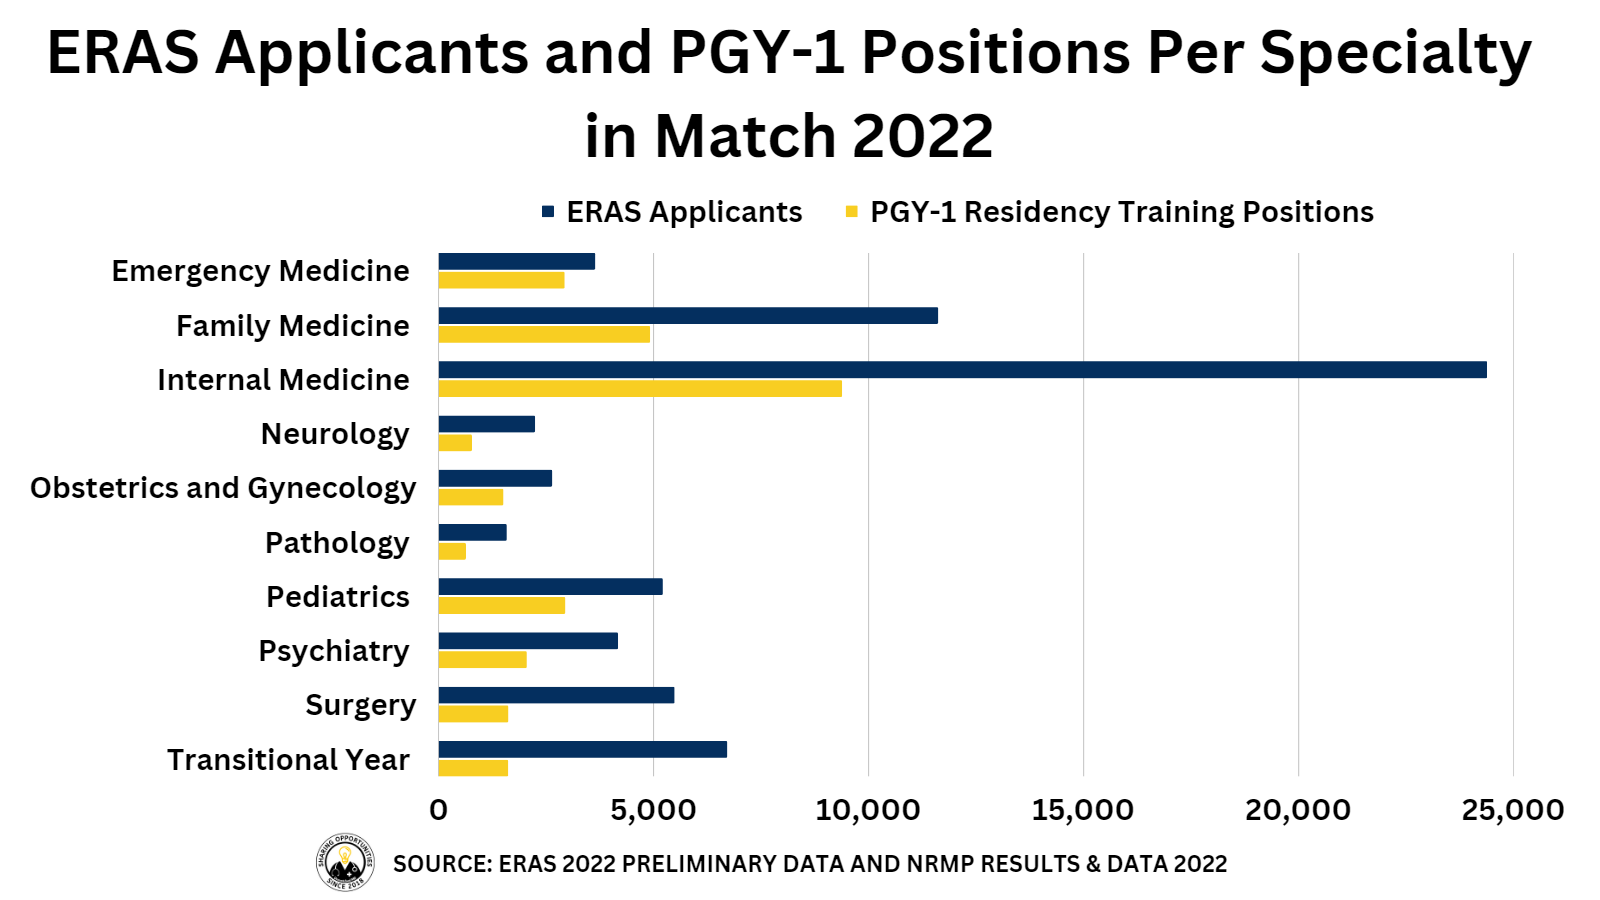 ERAS Applicants and PGY1 Positions Per Specialty in Match 2022